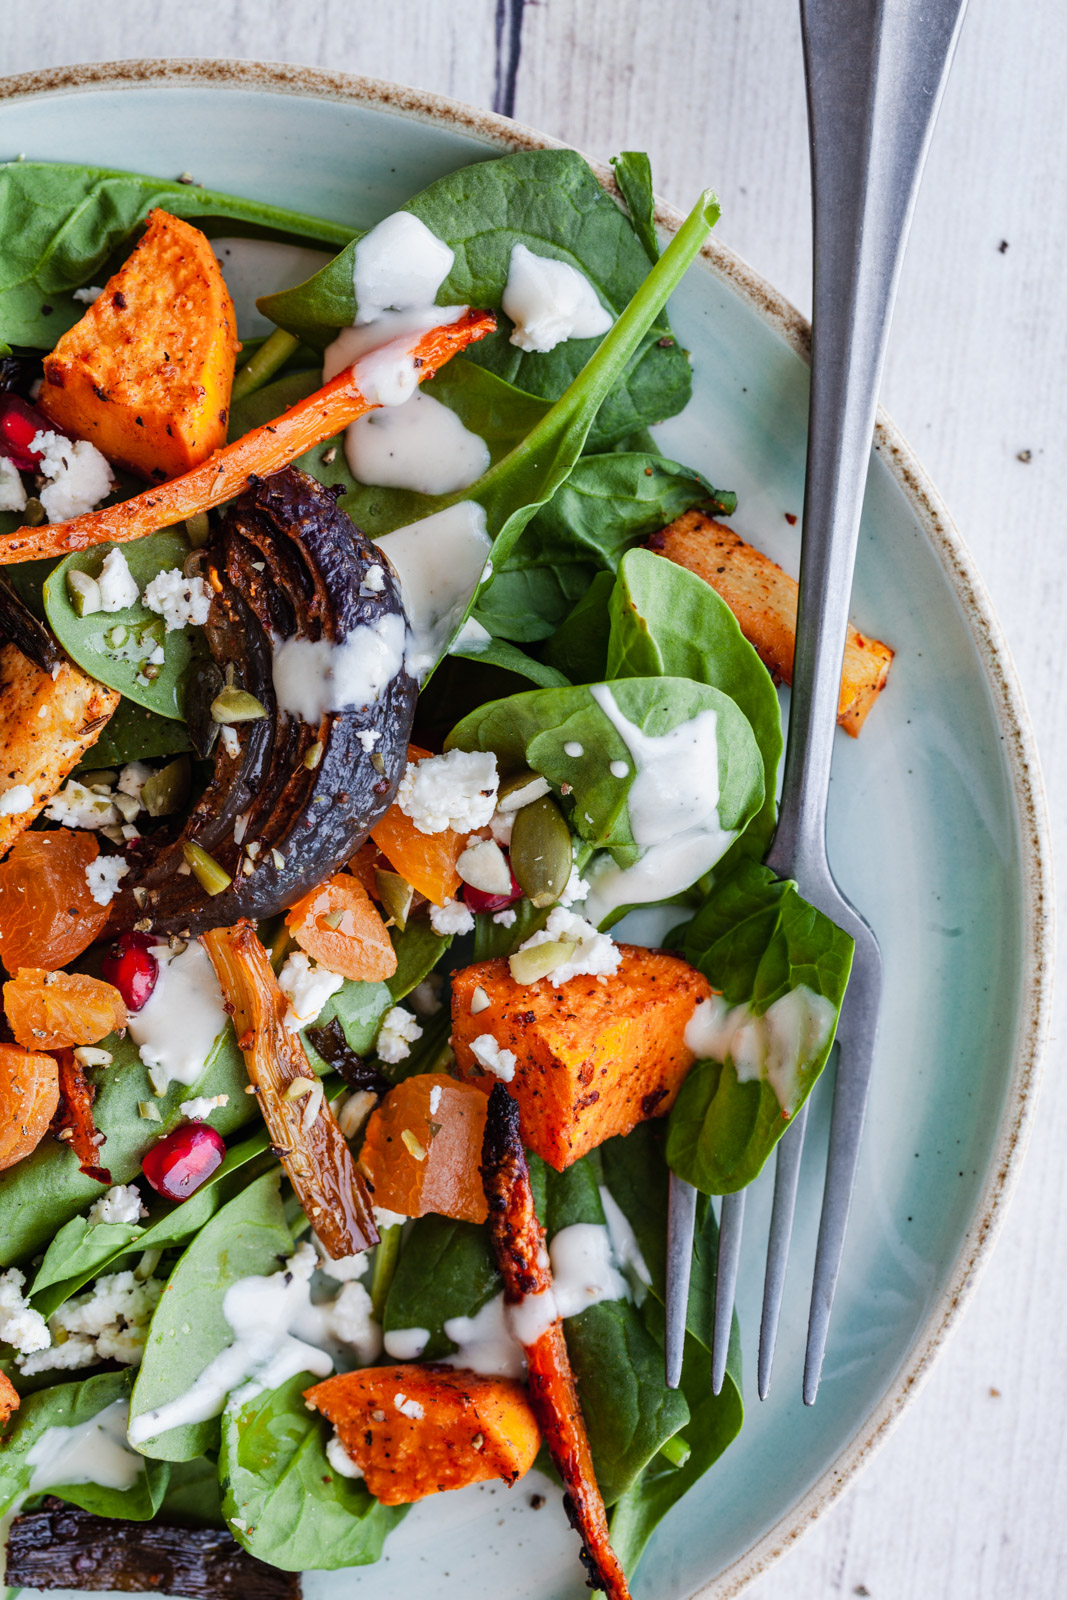 Moroccan Style Roasted Vegetable Salad With a Tahini Dressing